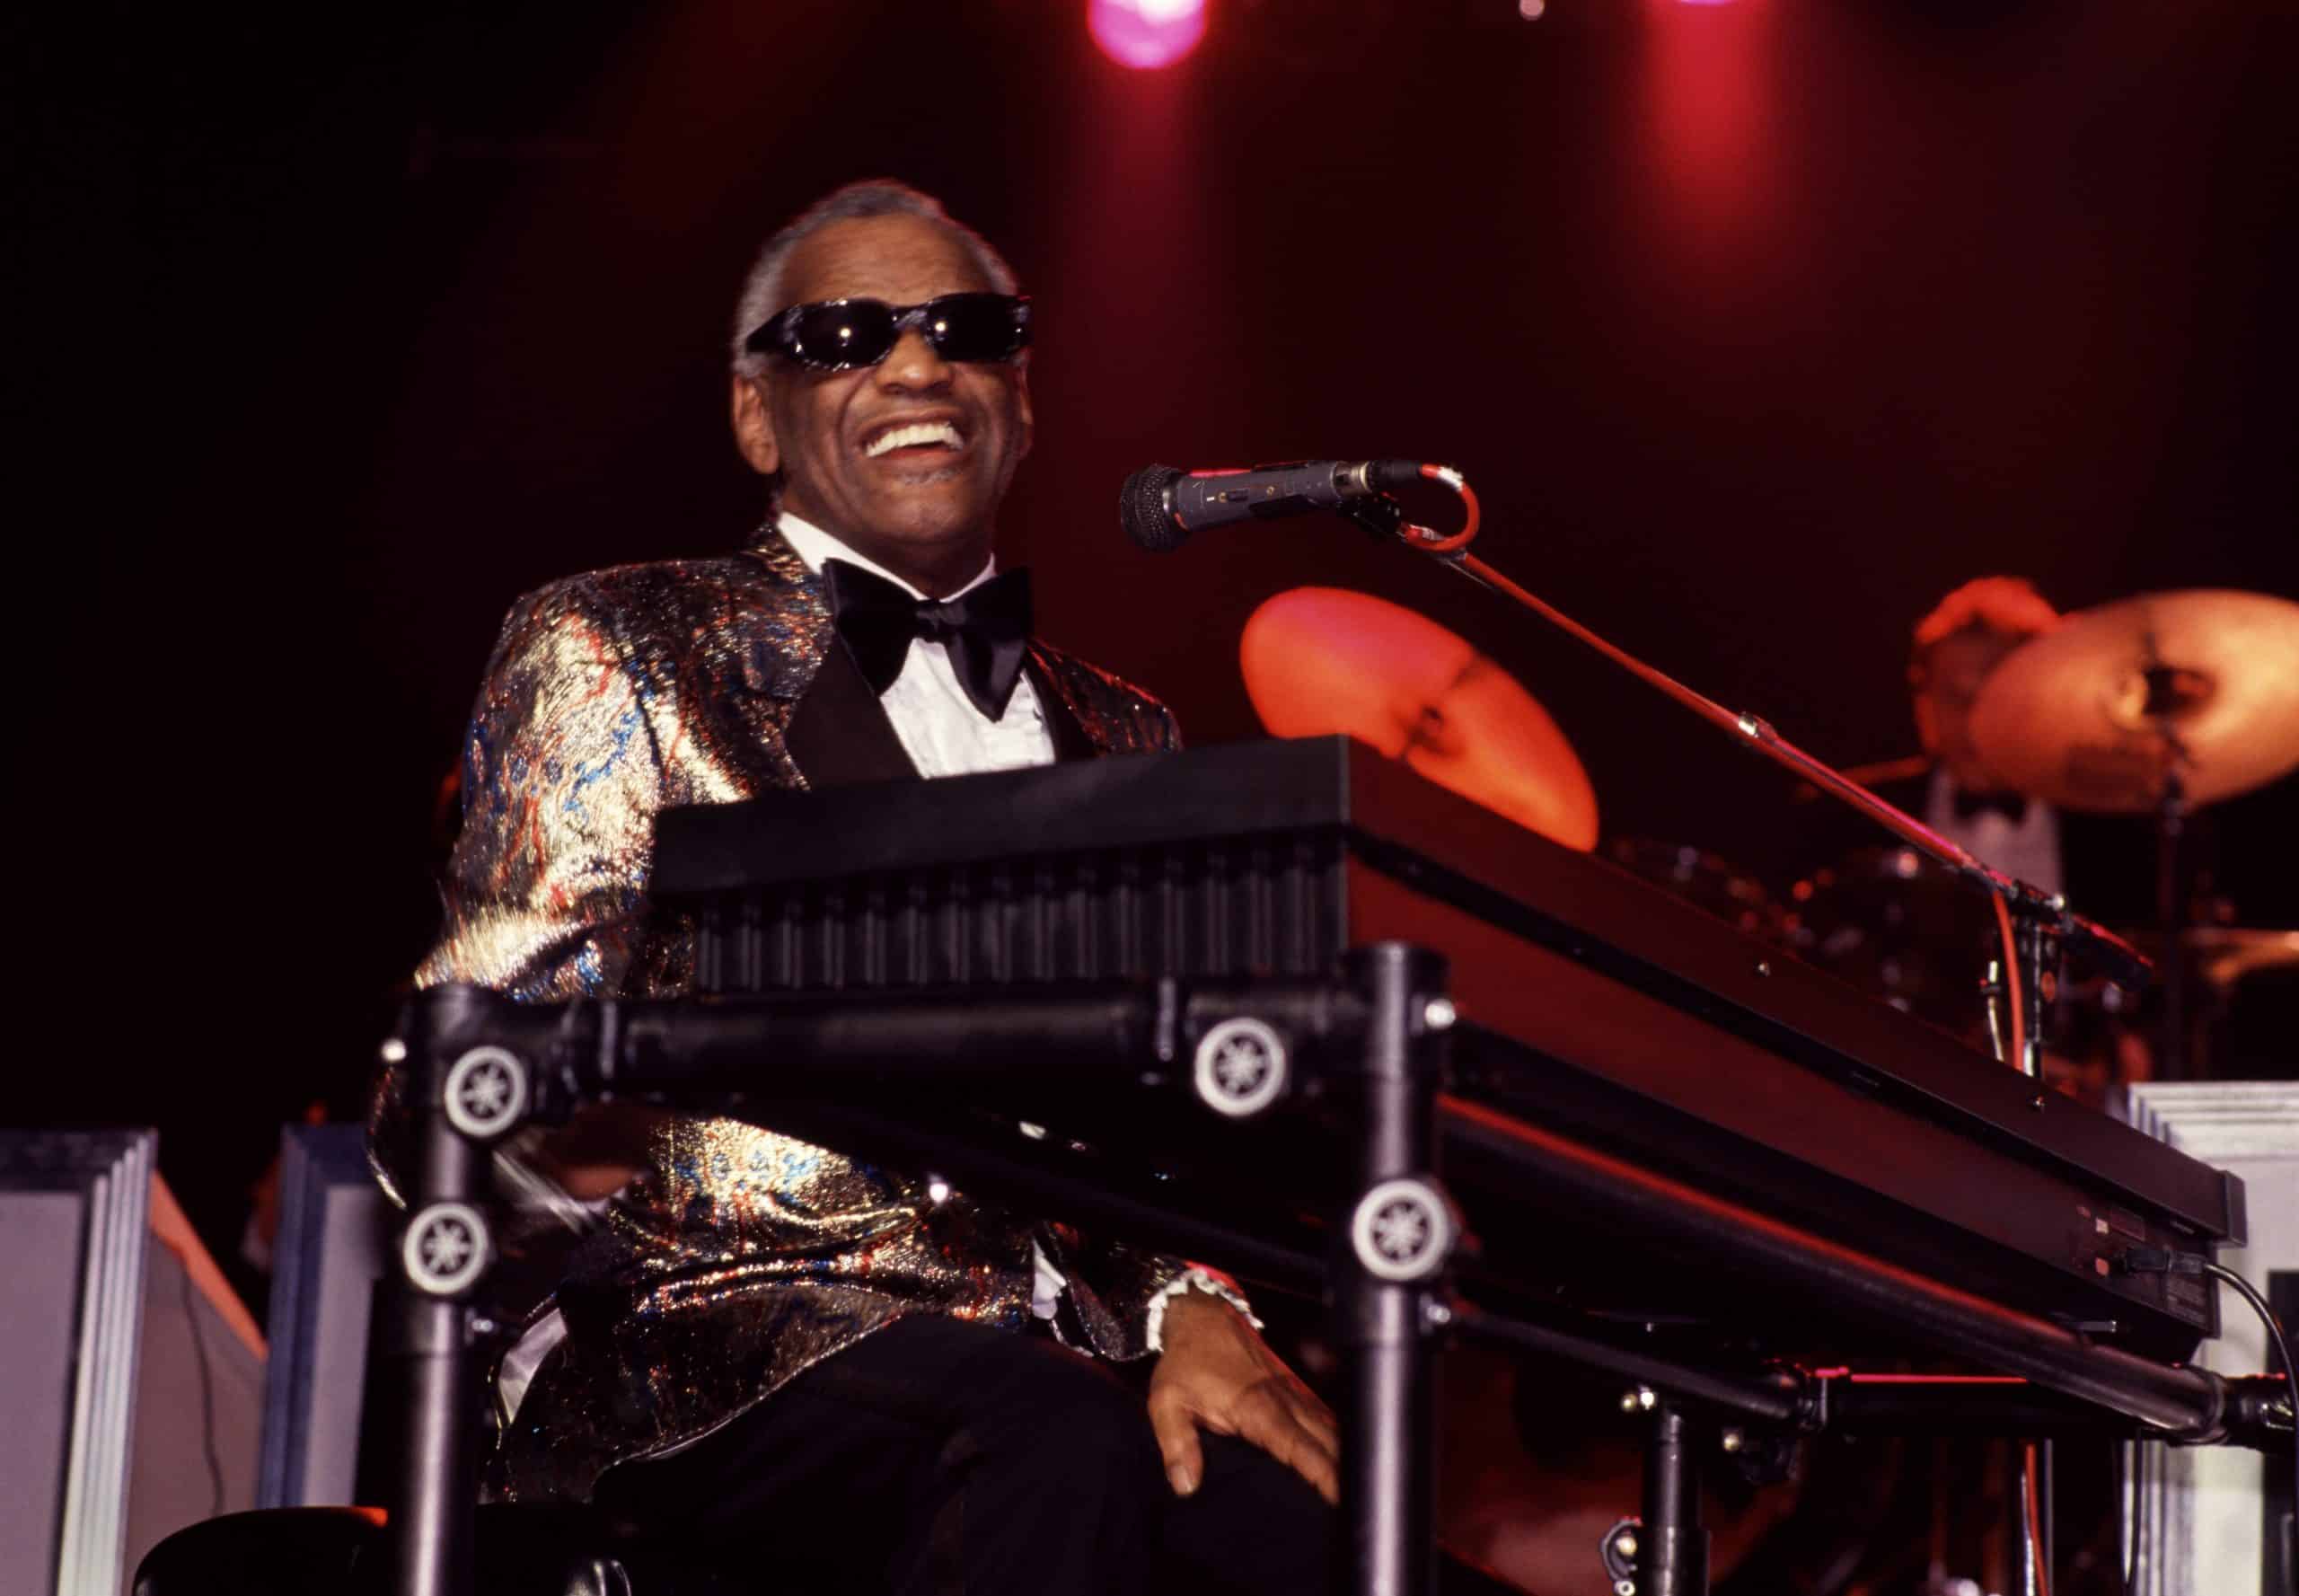 Ray Charles is in the Country Music Hall of Fame and the Rock & Roll Hall of Fame